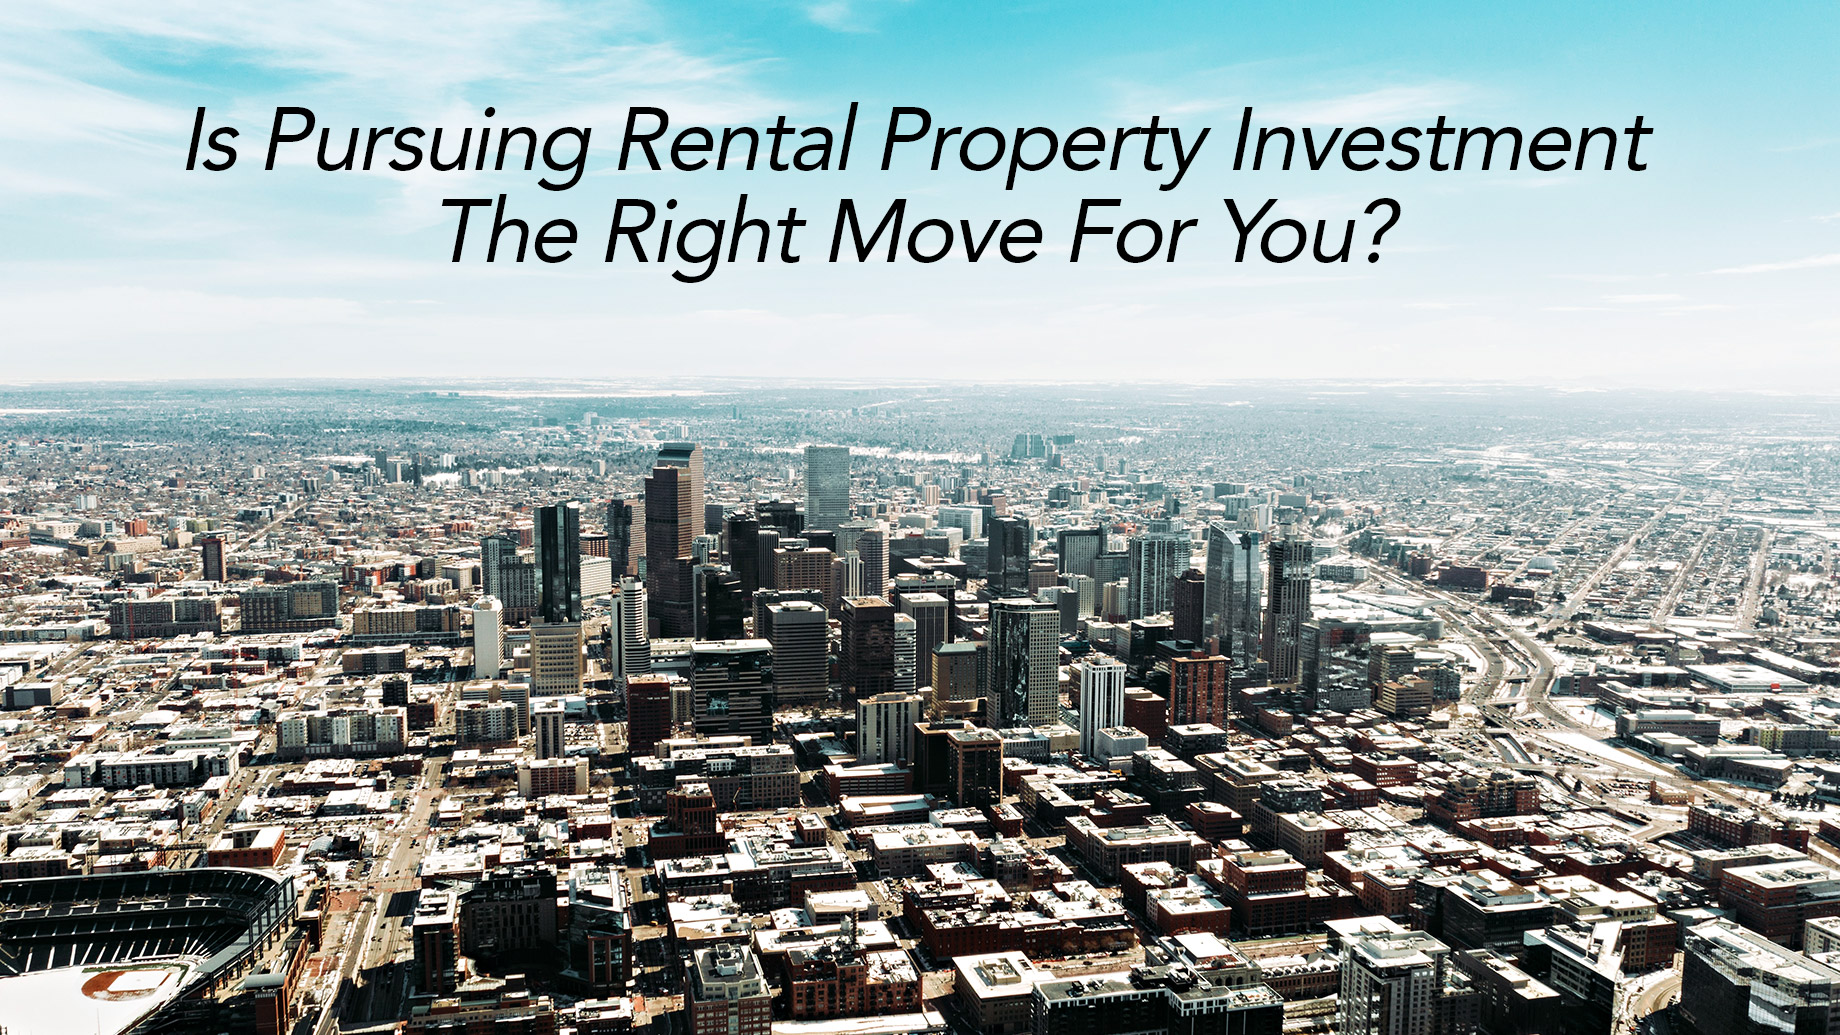 Is Pursuing Rental Property Investment The Right Move For You?